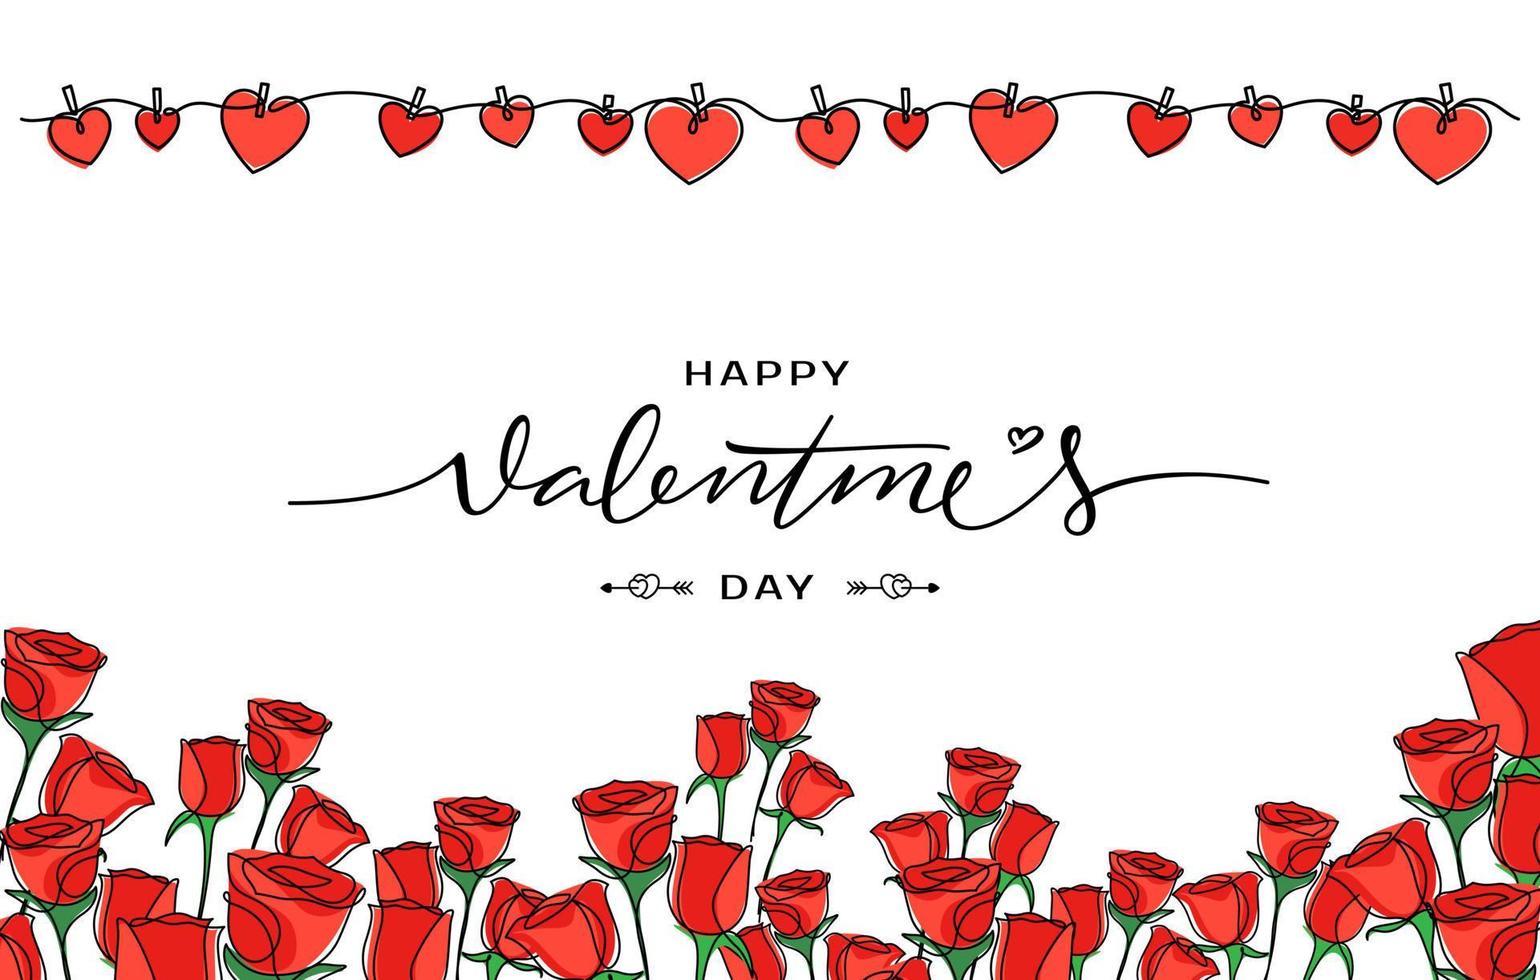 valentine's day background and decorated ornaments vector